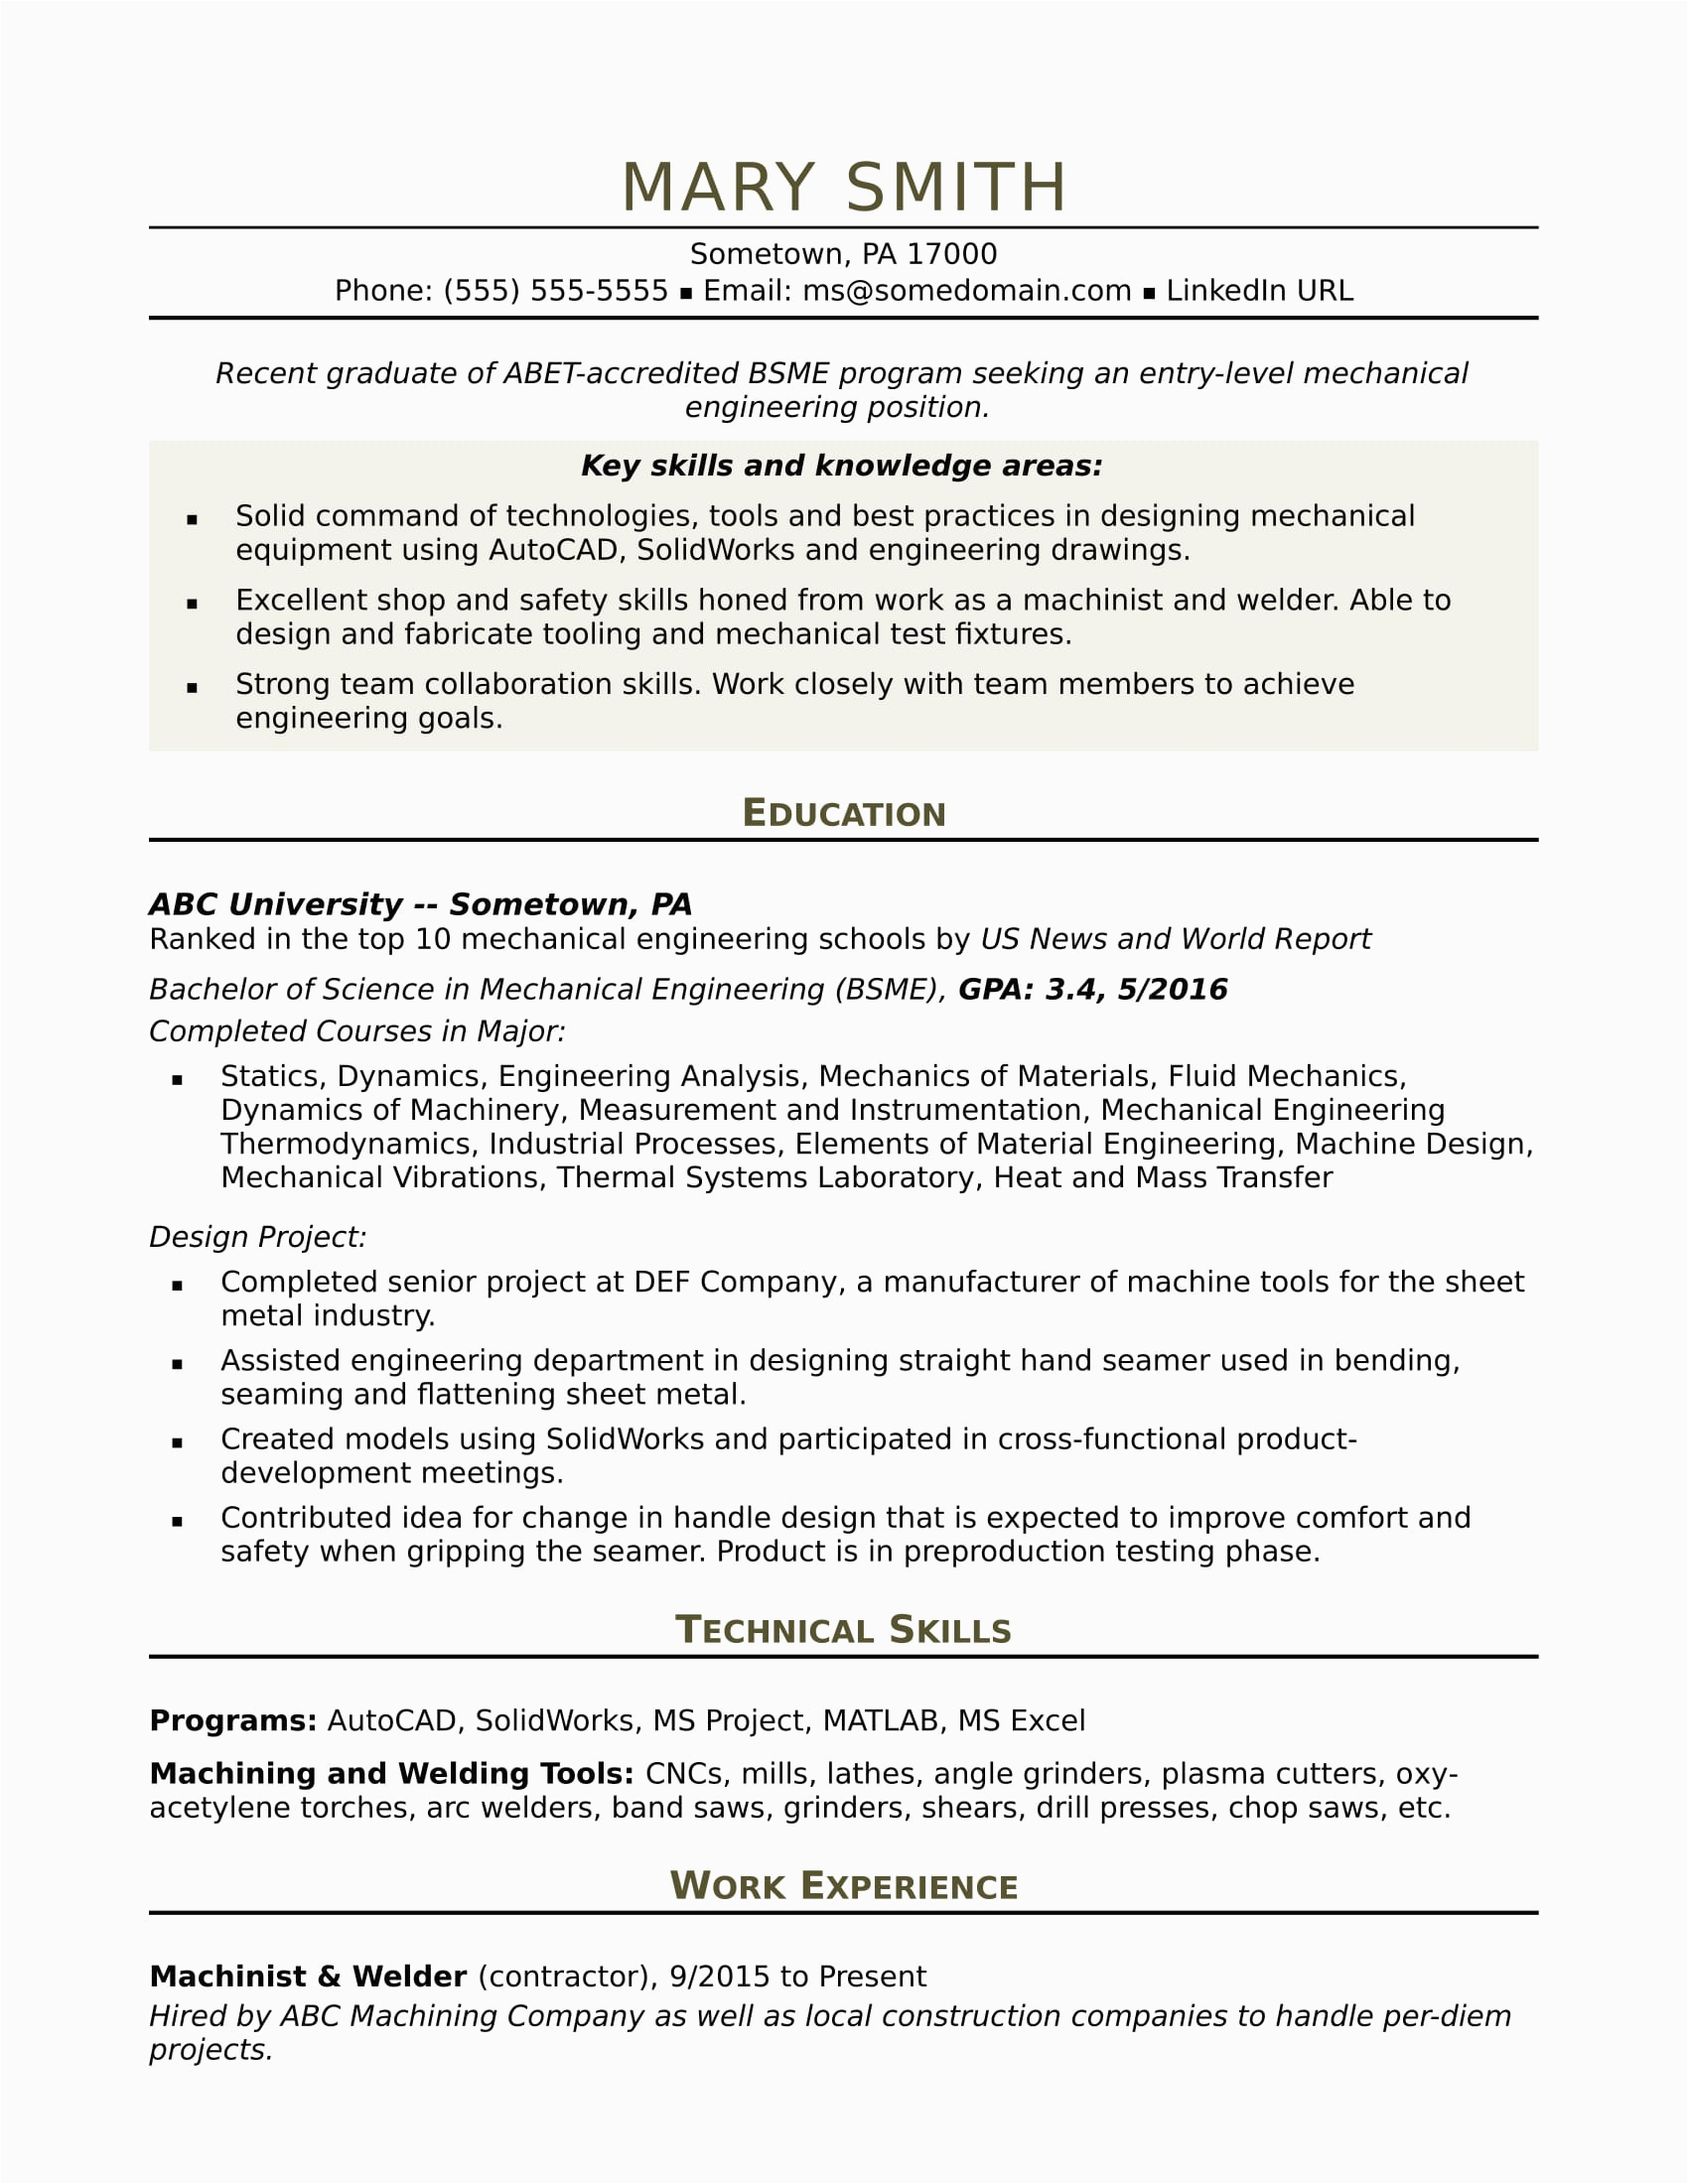 Professional Summary Resume Sample for Mechanical Engineer Sample Resume for An Entry Level Mechanical Engineer